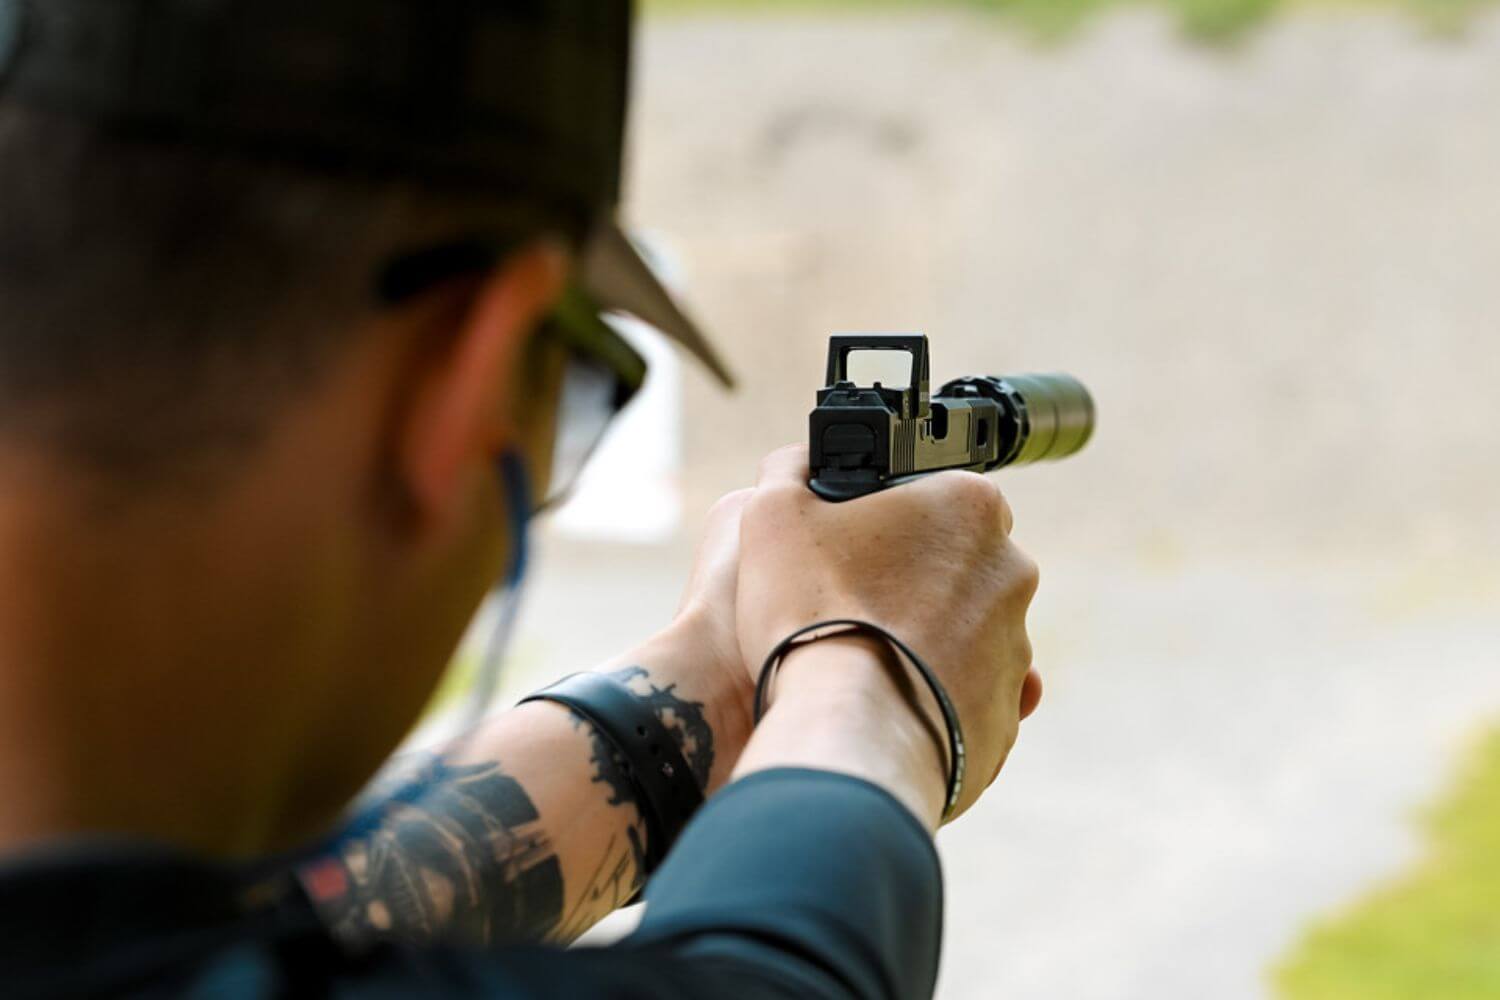 Gideon Optics Rock mounted on a pistol that's being tested at an outdoor shooting range